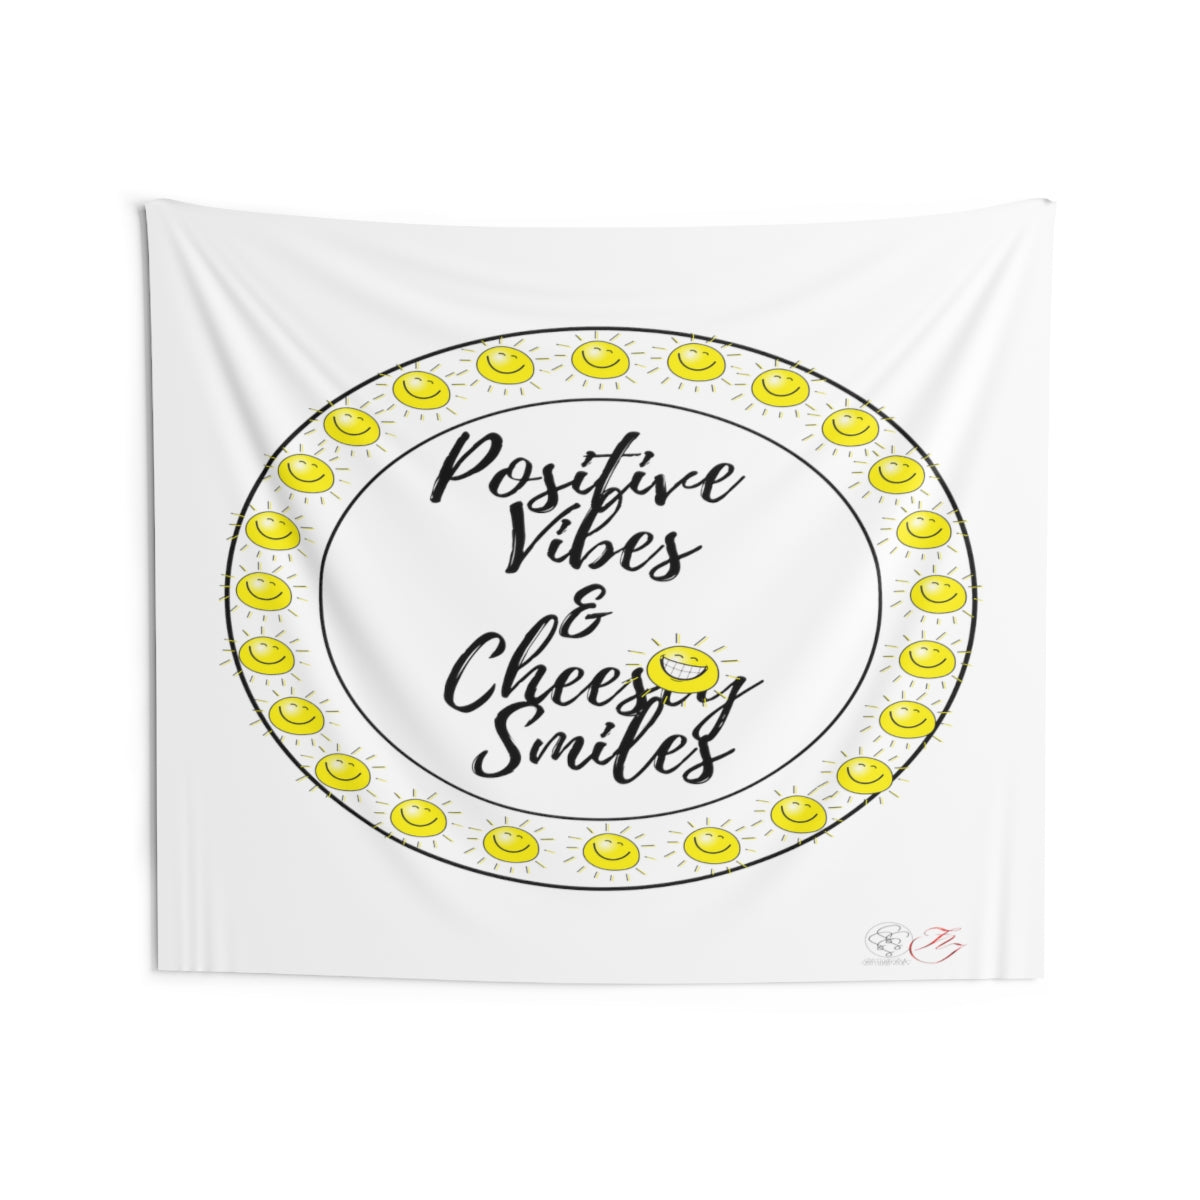 SSSS Positive Vibes & Cheesey Smiles Wall Tapestry - White (BL)